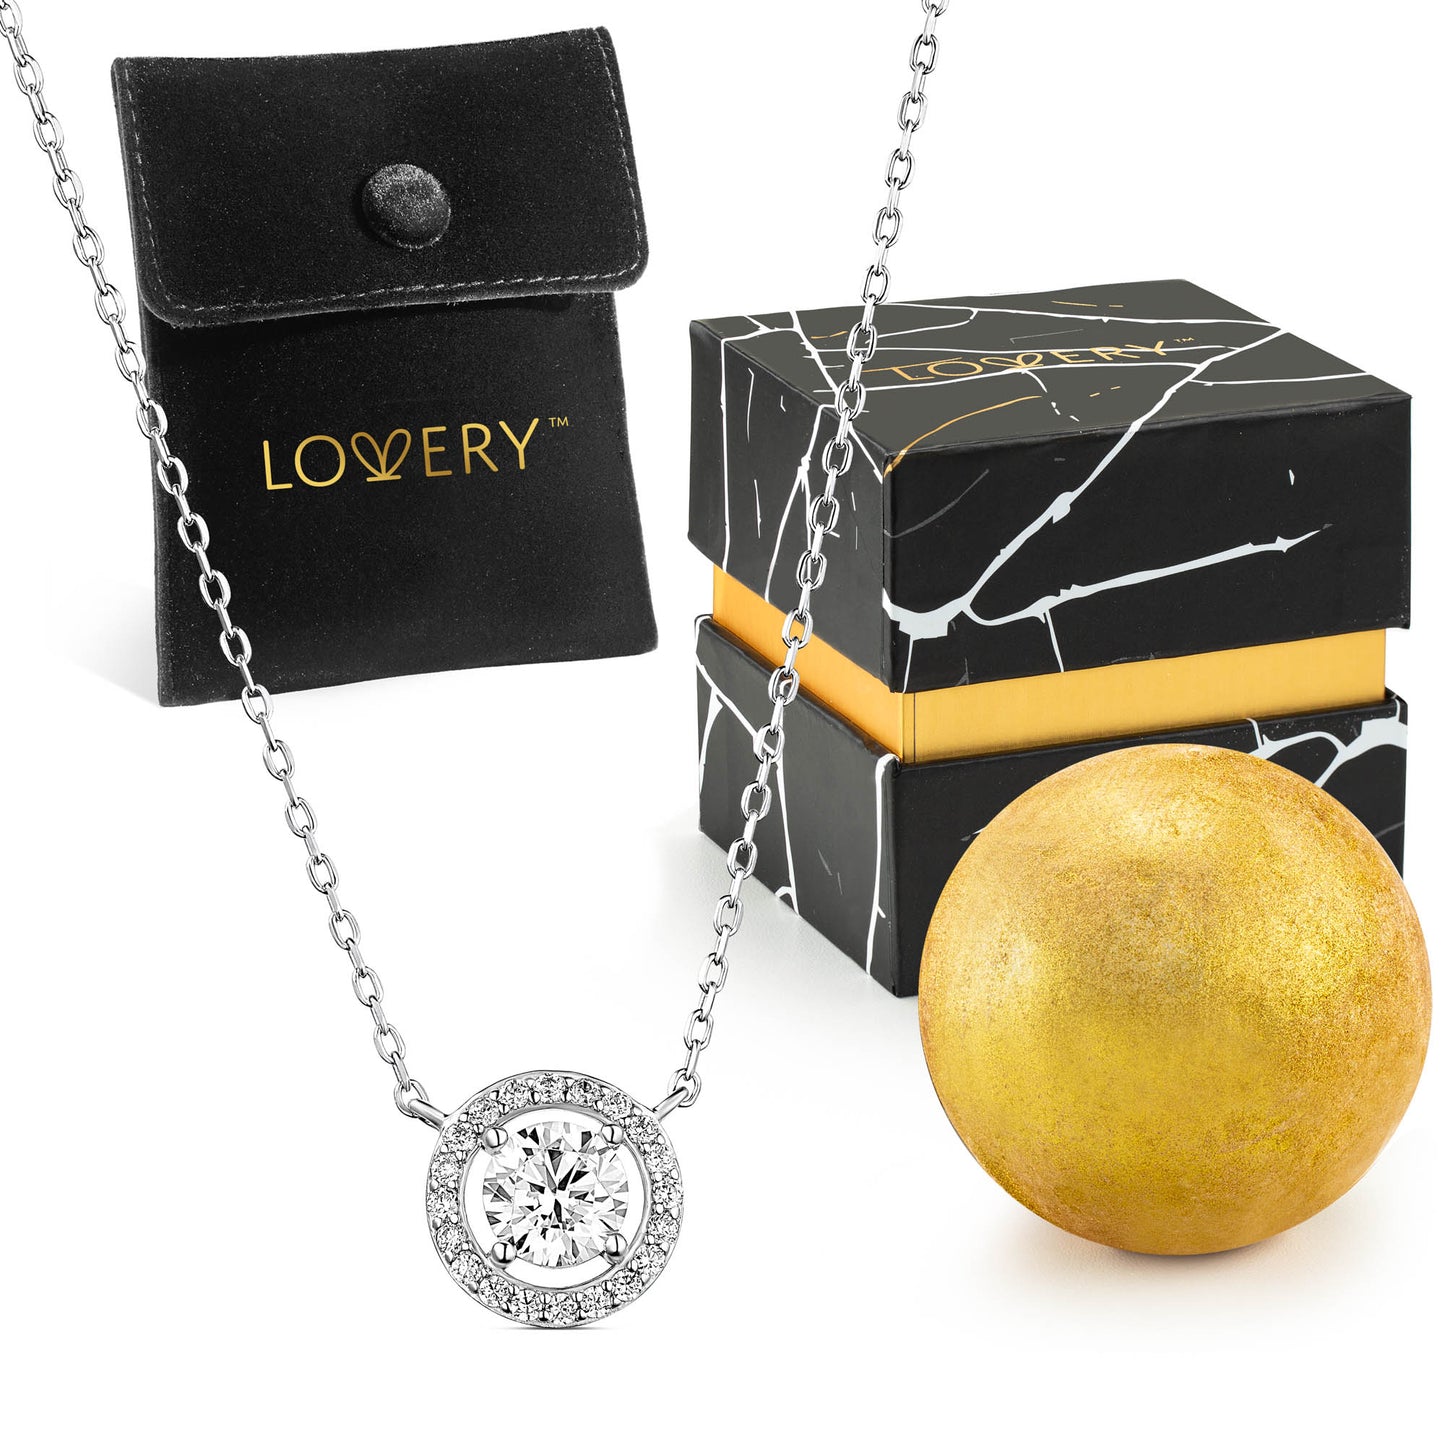 Sterling Silver Synthetic Diamonds Halo Necklace with Pouch, Bath Bomb & Gift Box